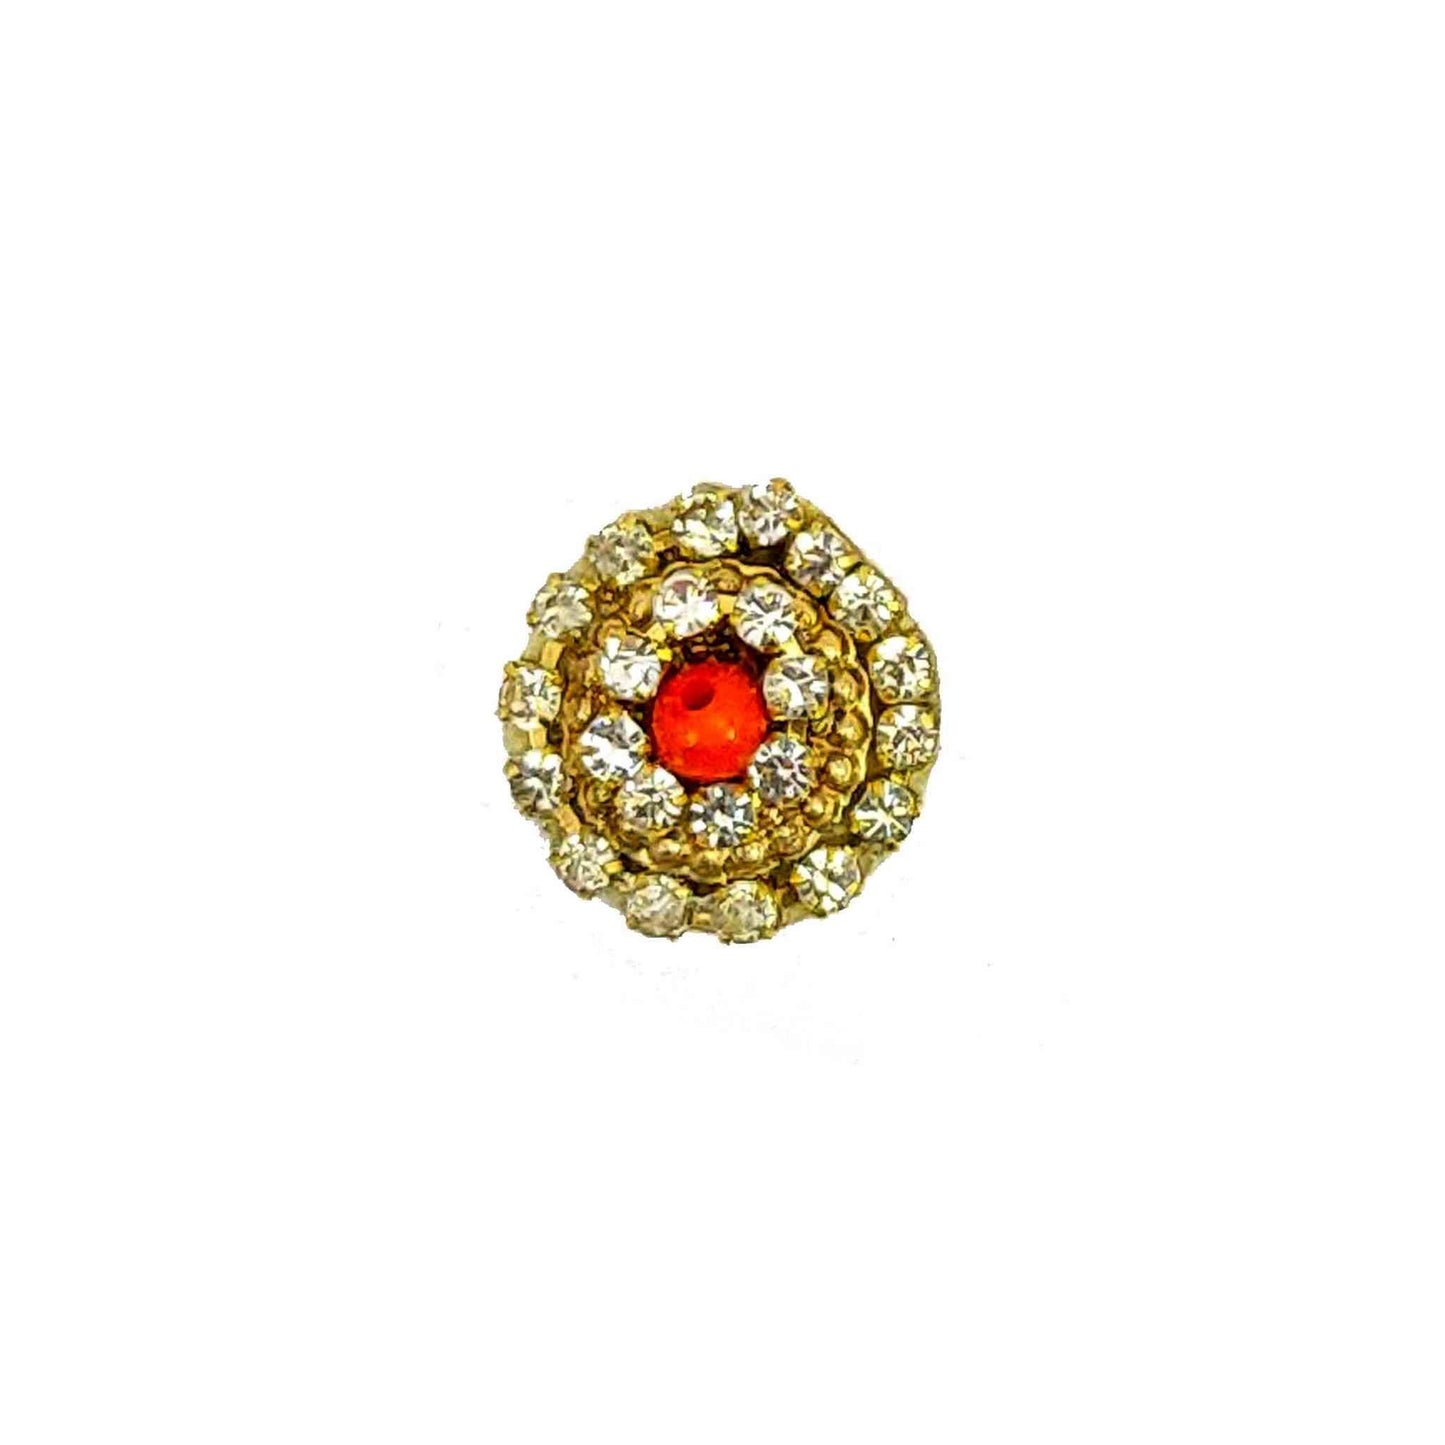 Indian Petals Rhinestone Studded Buti for DIY Craft, Trousseau Packing or Decoration (Bunch of 12) - Design 220, Orange - Indian Petals